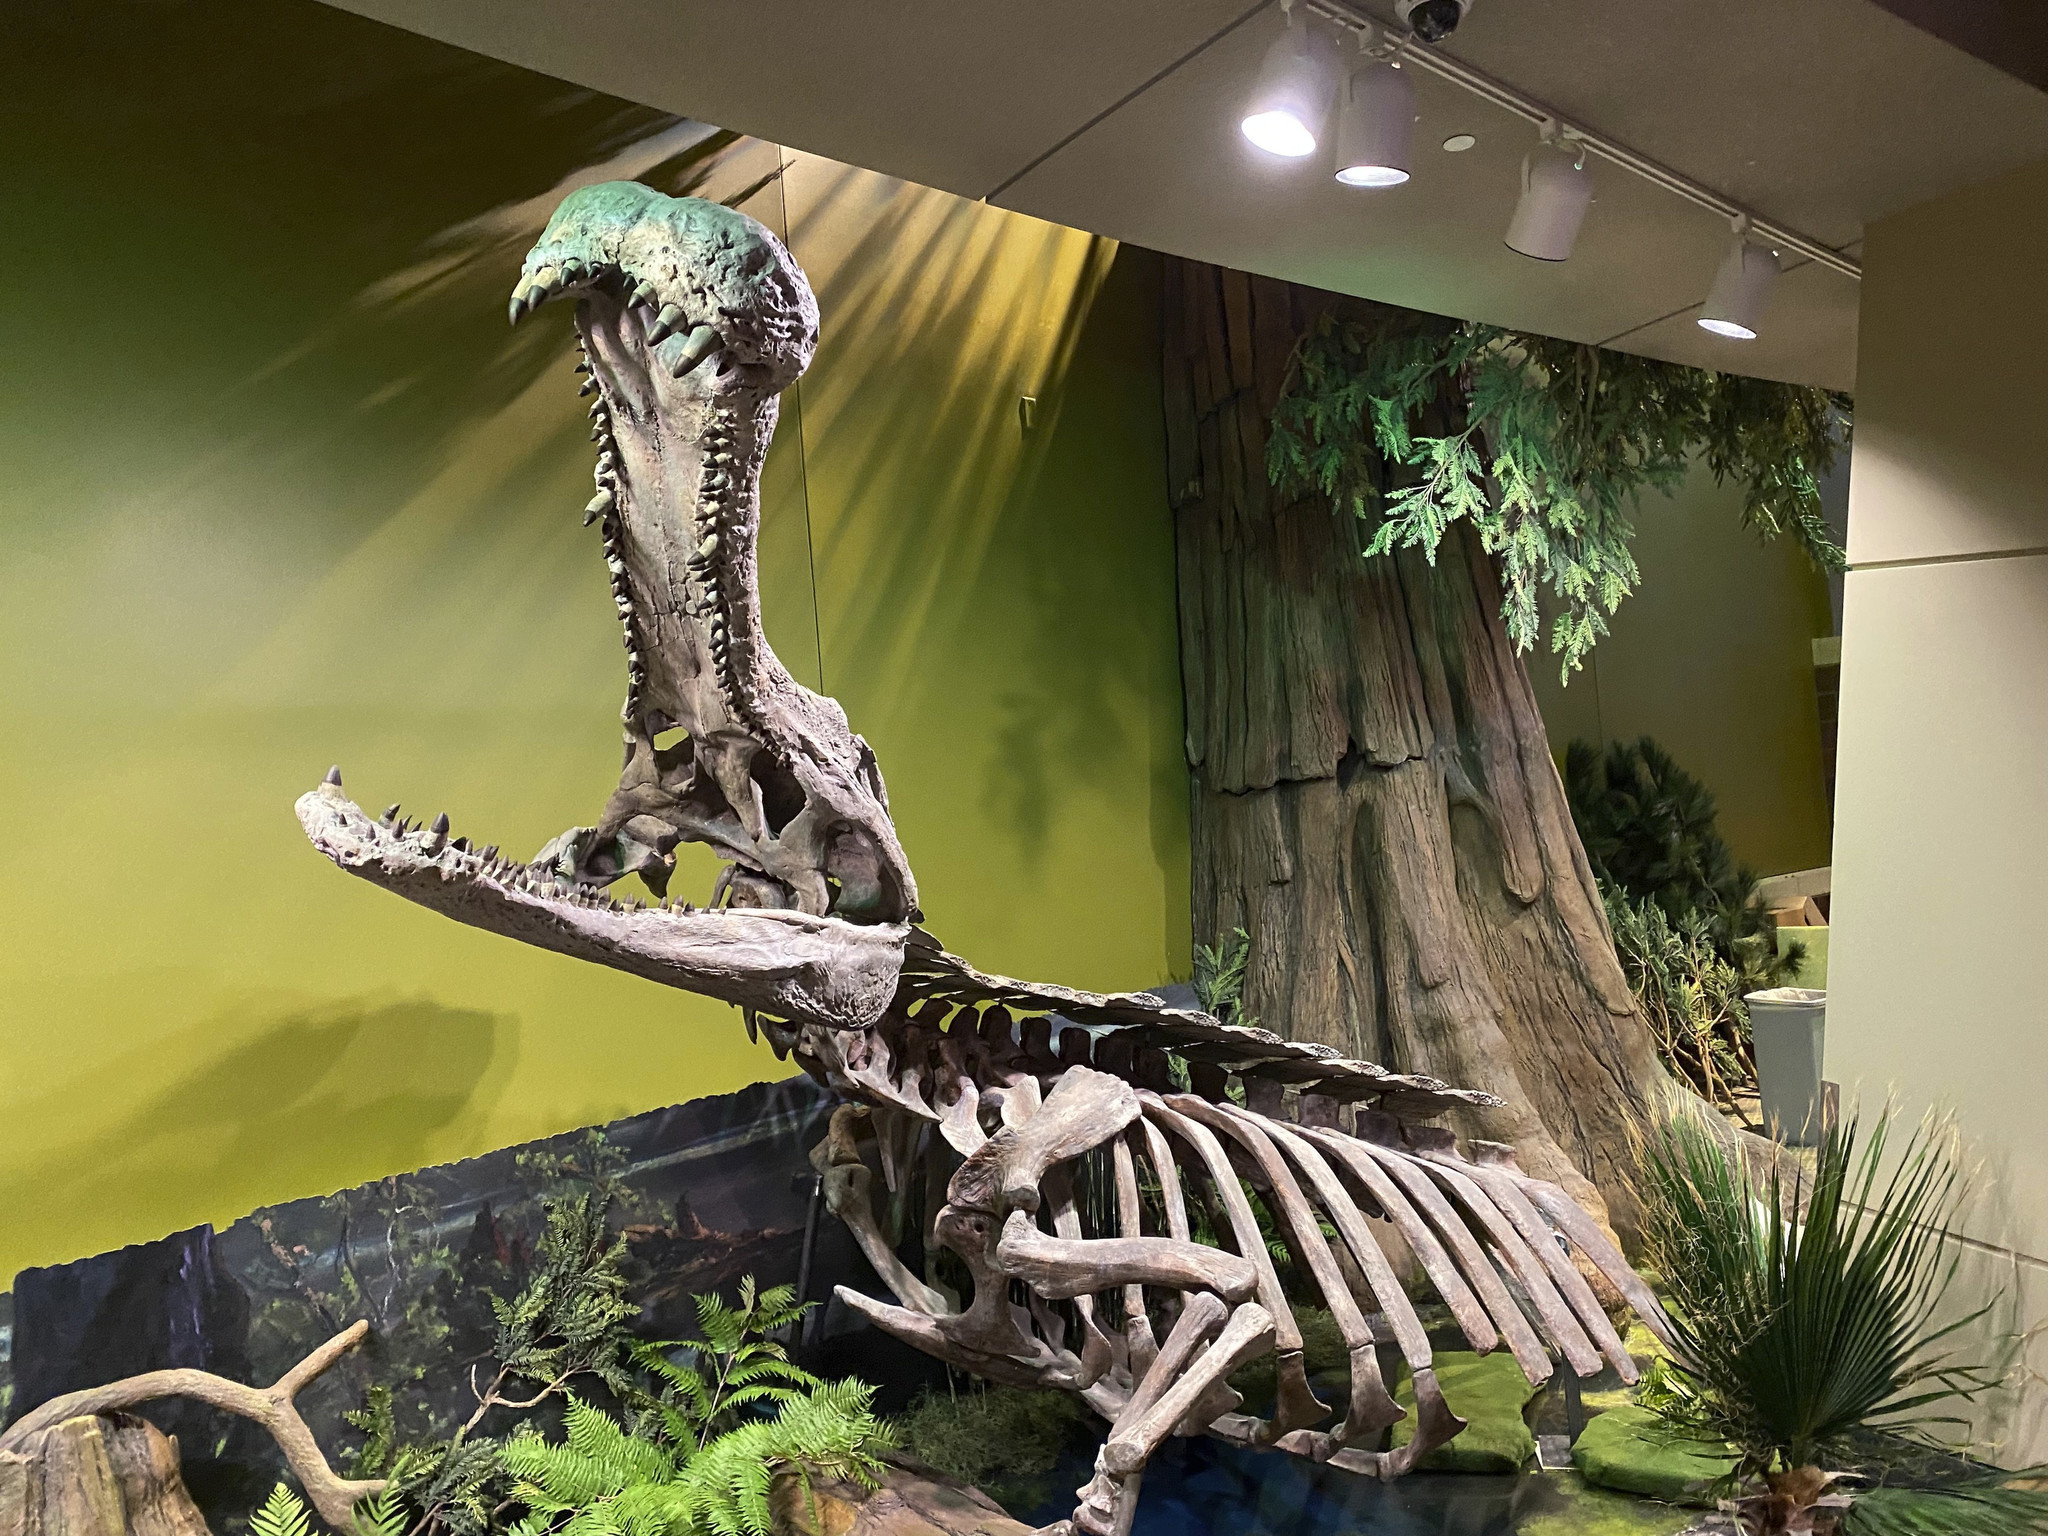 Dinosaurs with Cave – The Children's Museum of Indianapolis Store